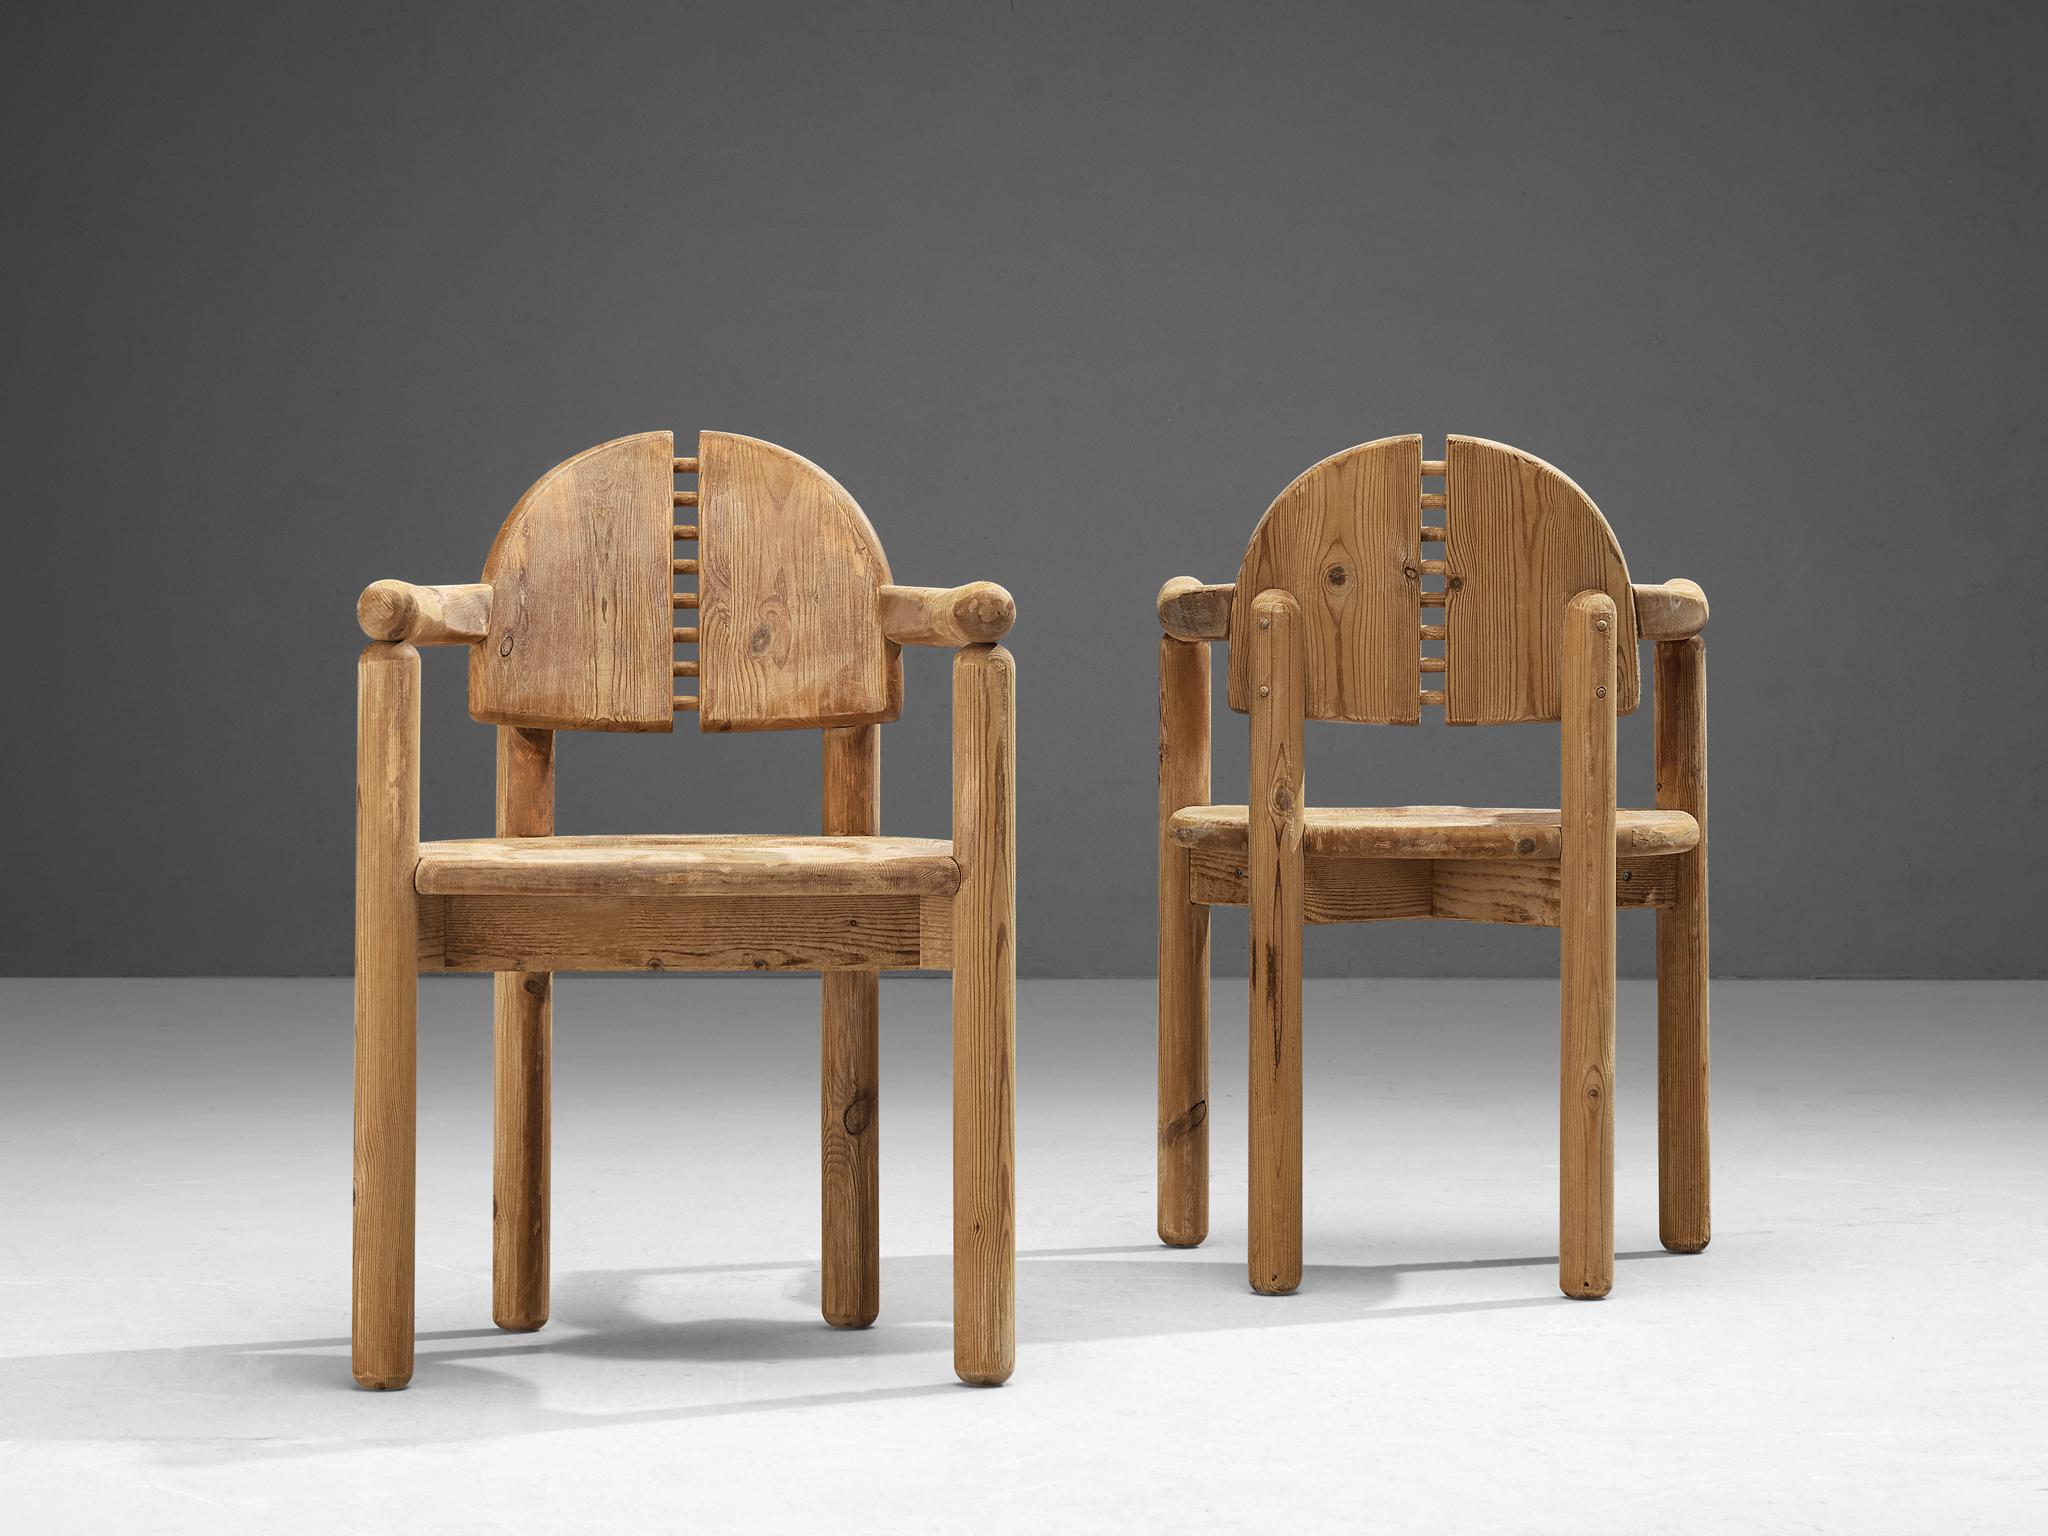 Rainer Daumiller for Hirtshals Savvaerk, pair of dining chairs, pine, Denmark, 1970s.

Beautiful pair of organic and natural armchairs in solid pine. A simplistic design with a large seating and attention for the natural expression and grain of the